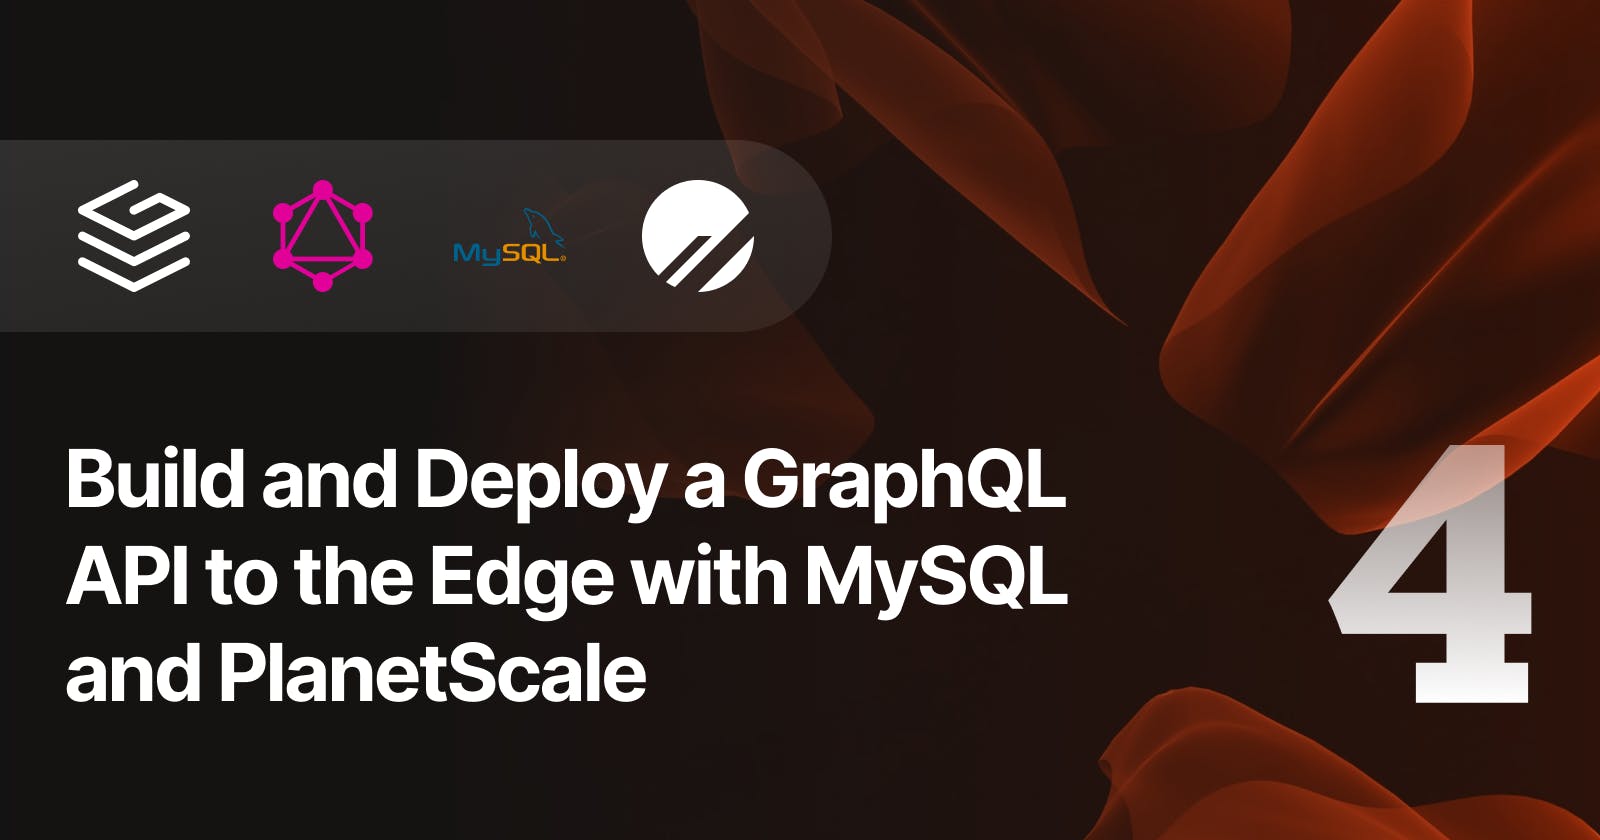 Build and Deploy a GraphQL API to the Edge with MySQL and PlanetScale — Part 4